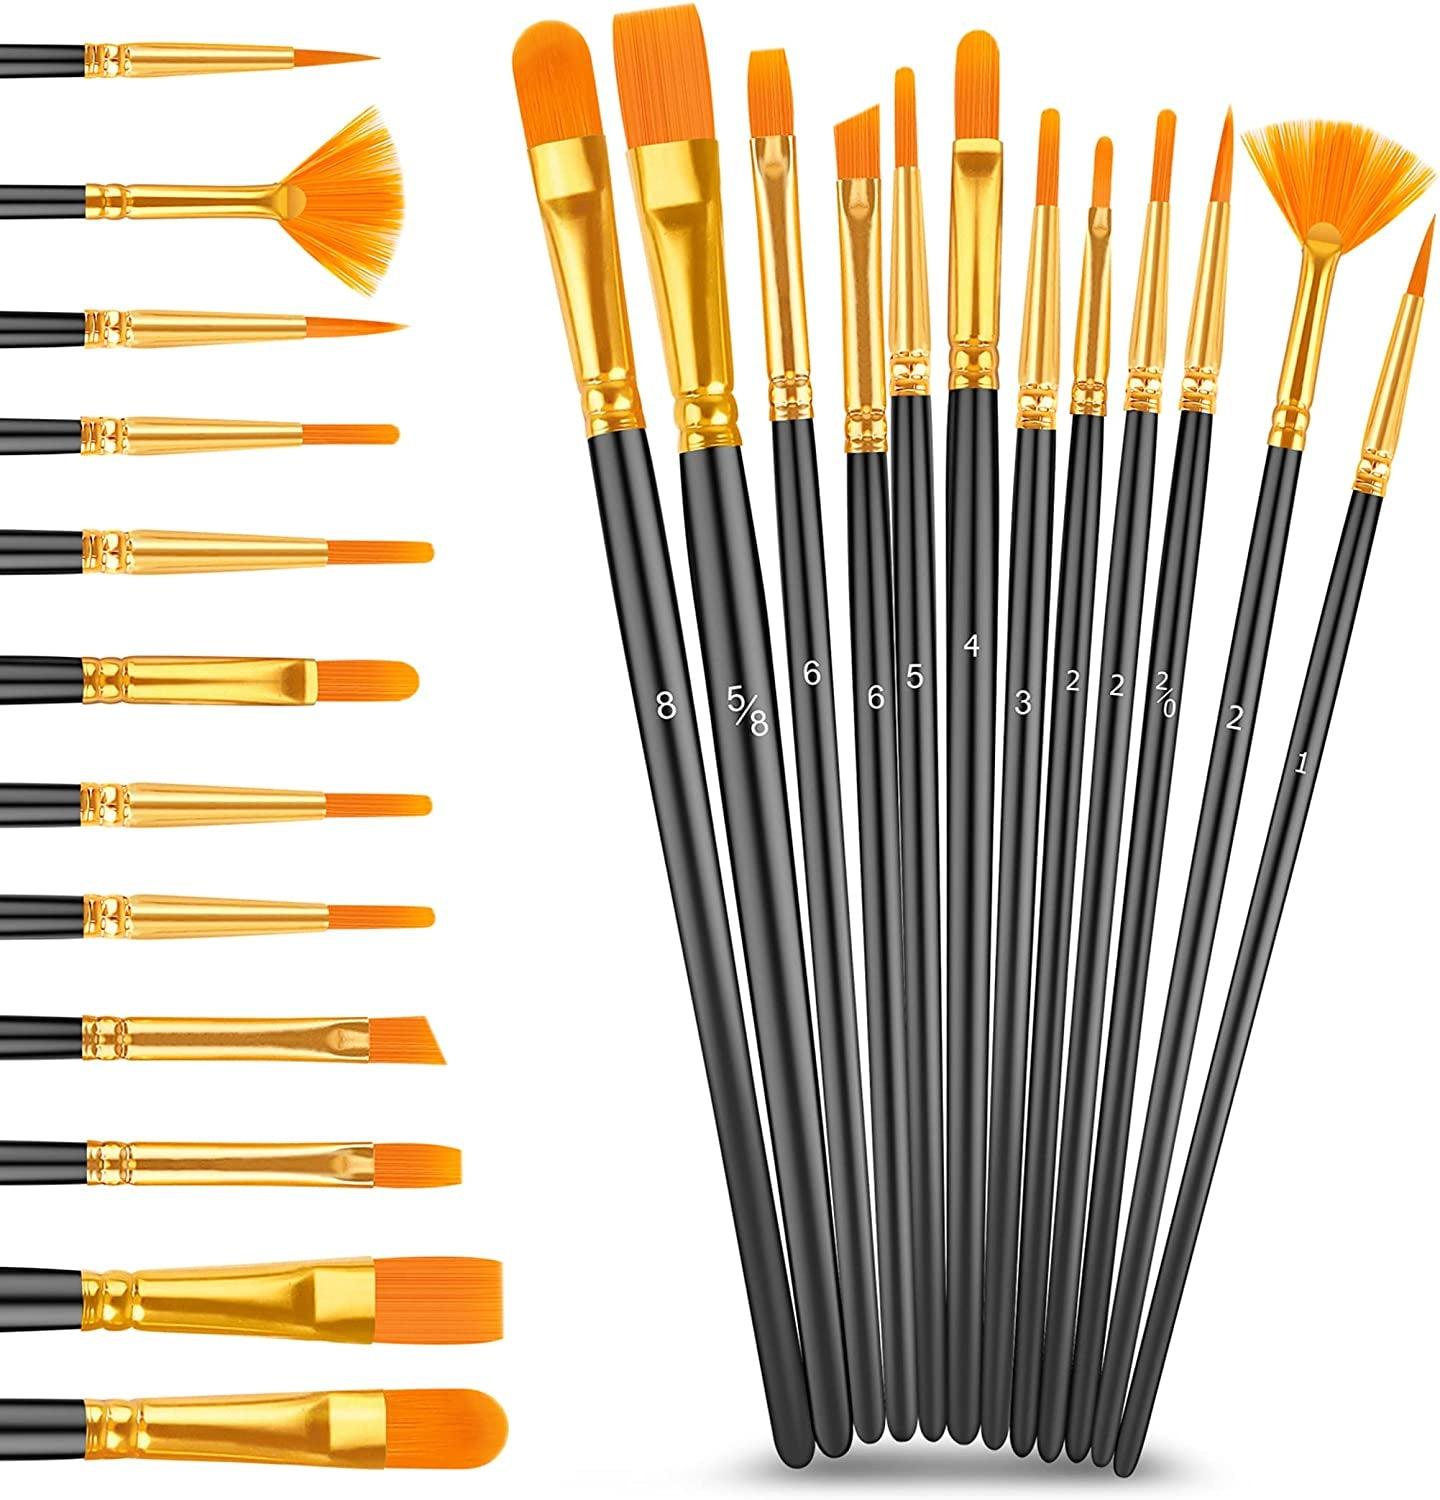  Acrylic Paint Brush Set with 15 Premium Artist Brushes and 24  Color Acrylic Paint - Ultimate Kit for Canvas, Wood, Ceramic, Fabric  (Acrylic Paint Set)